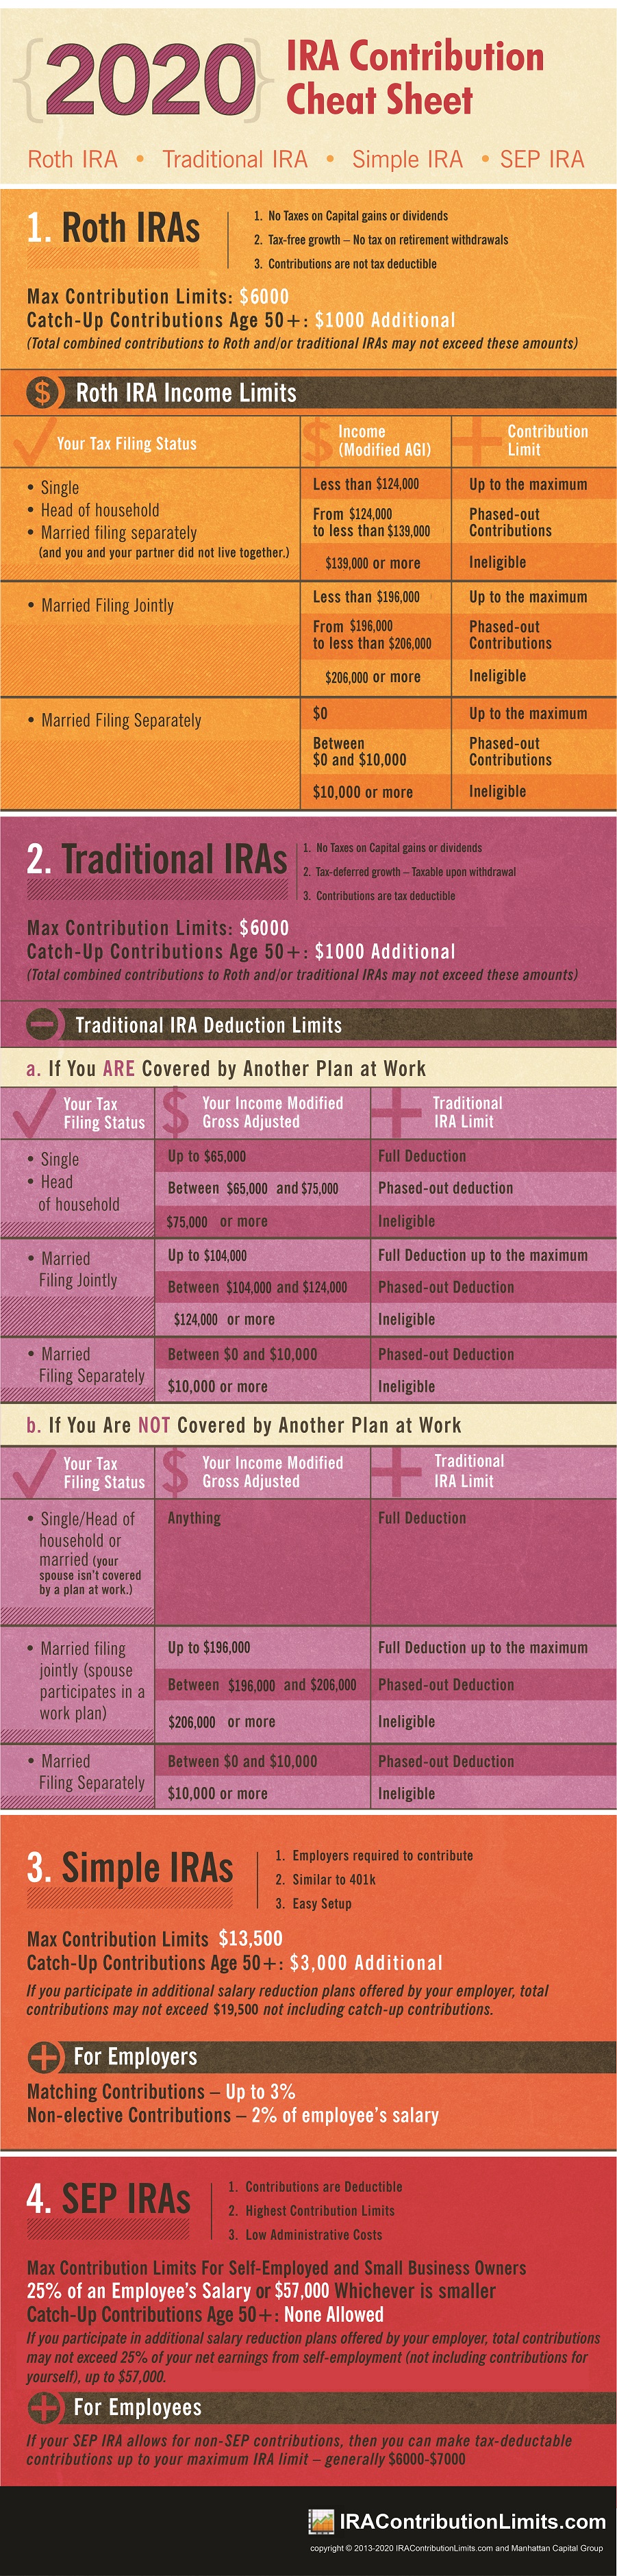 2020 IRA Contribution Limits for Roth, SEP, Simple and Traditional Retirement Accounts Cheat Sheet